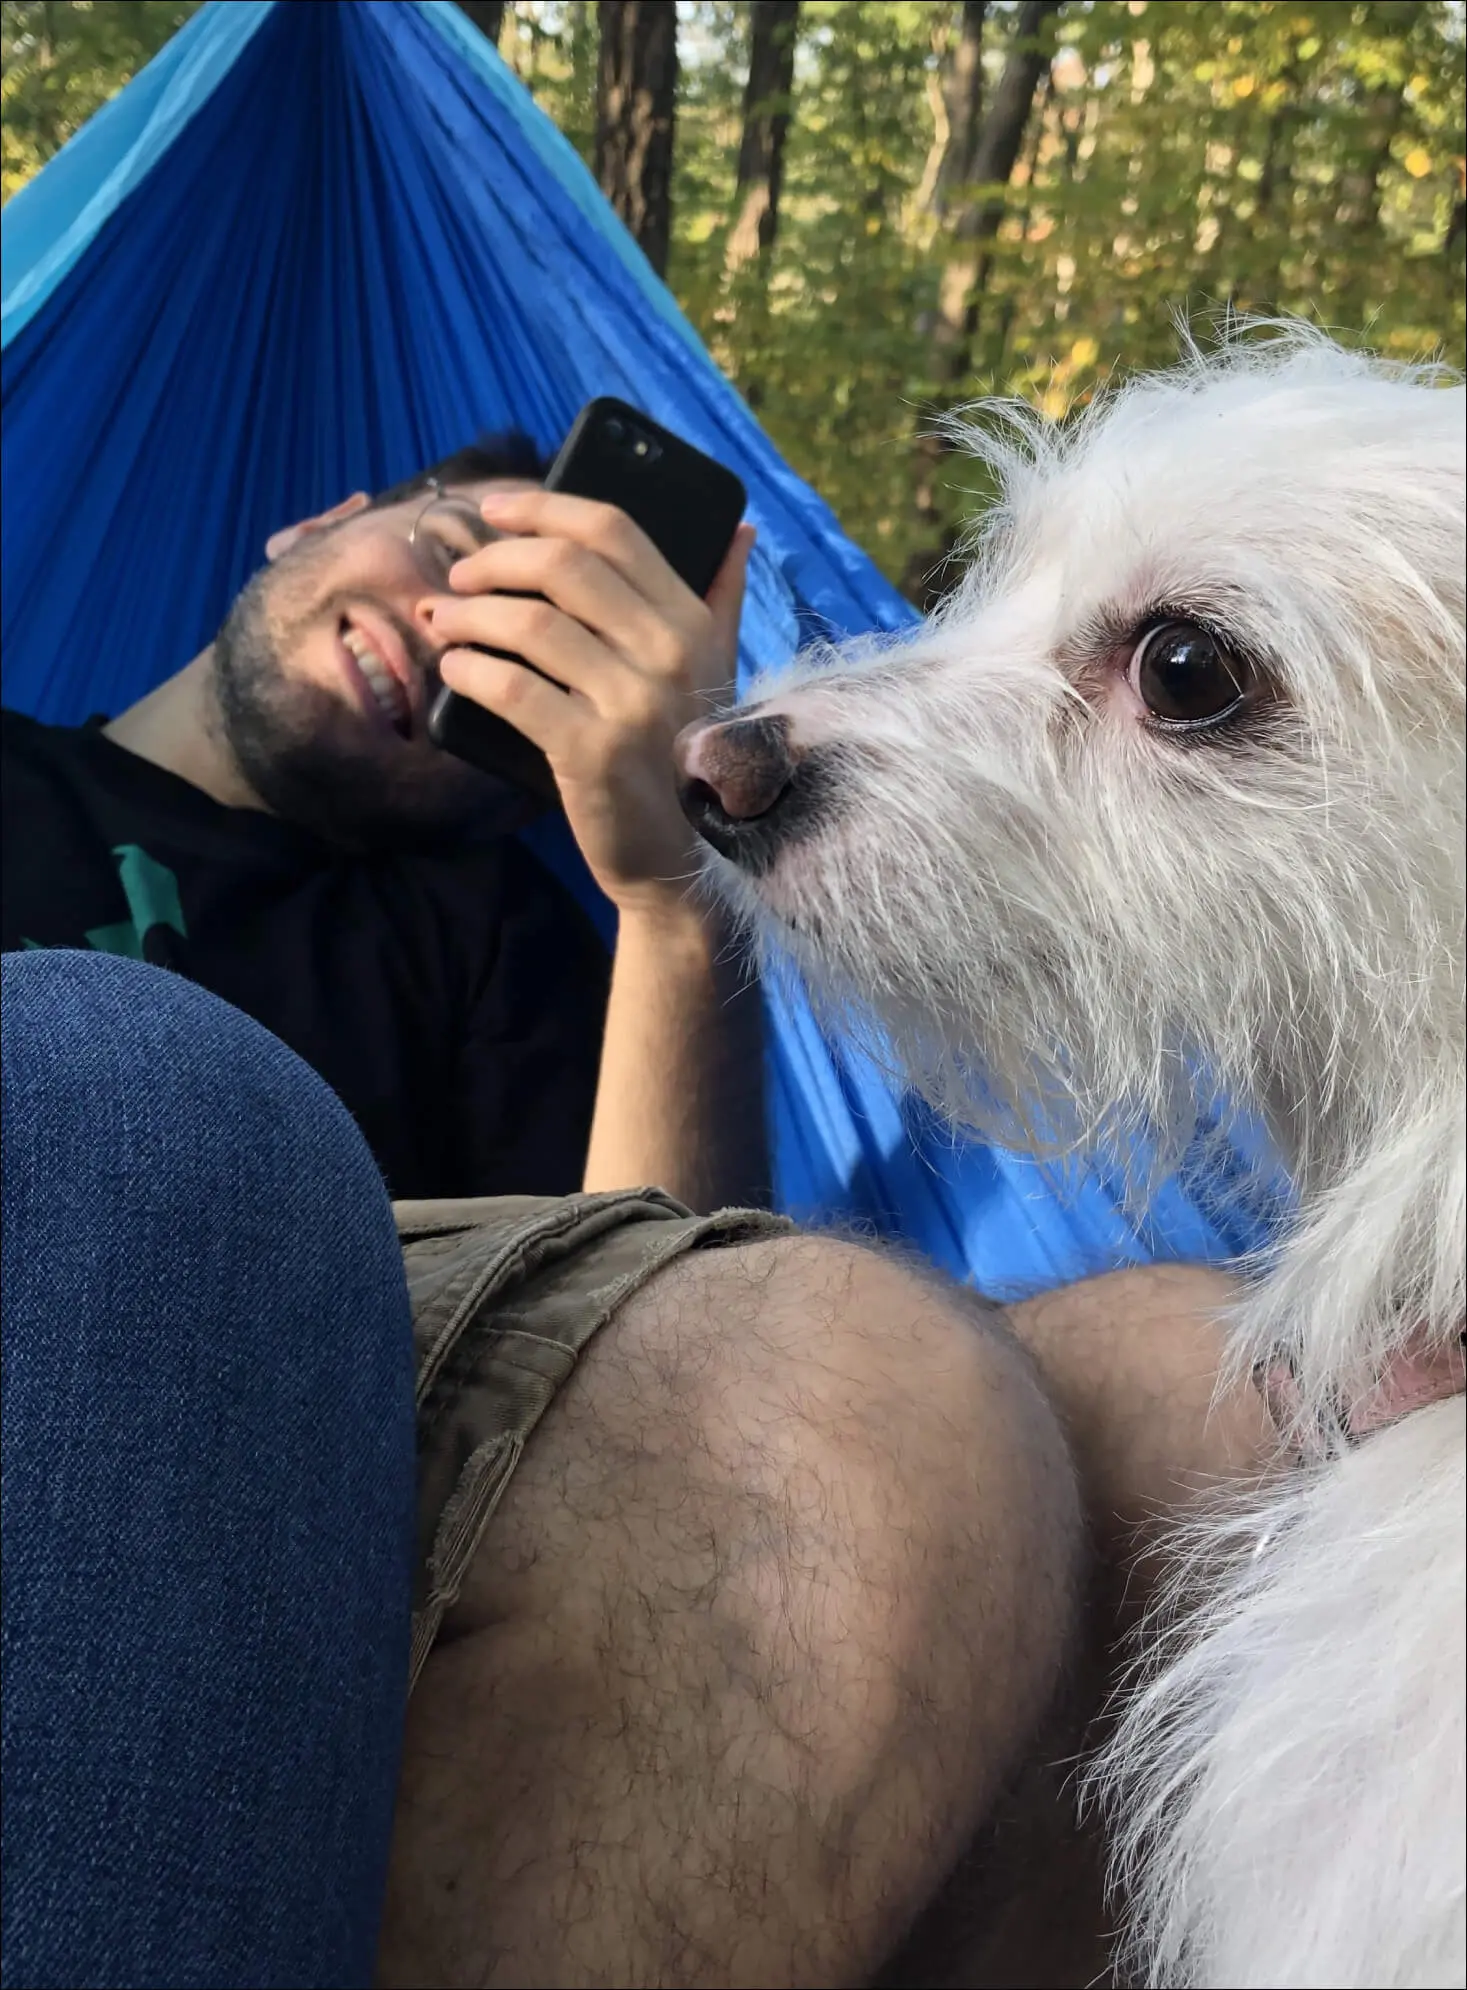 Fabric employee Lev in a hammock with his dog.